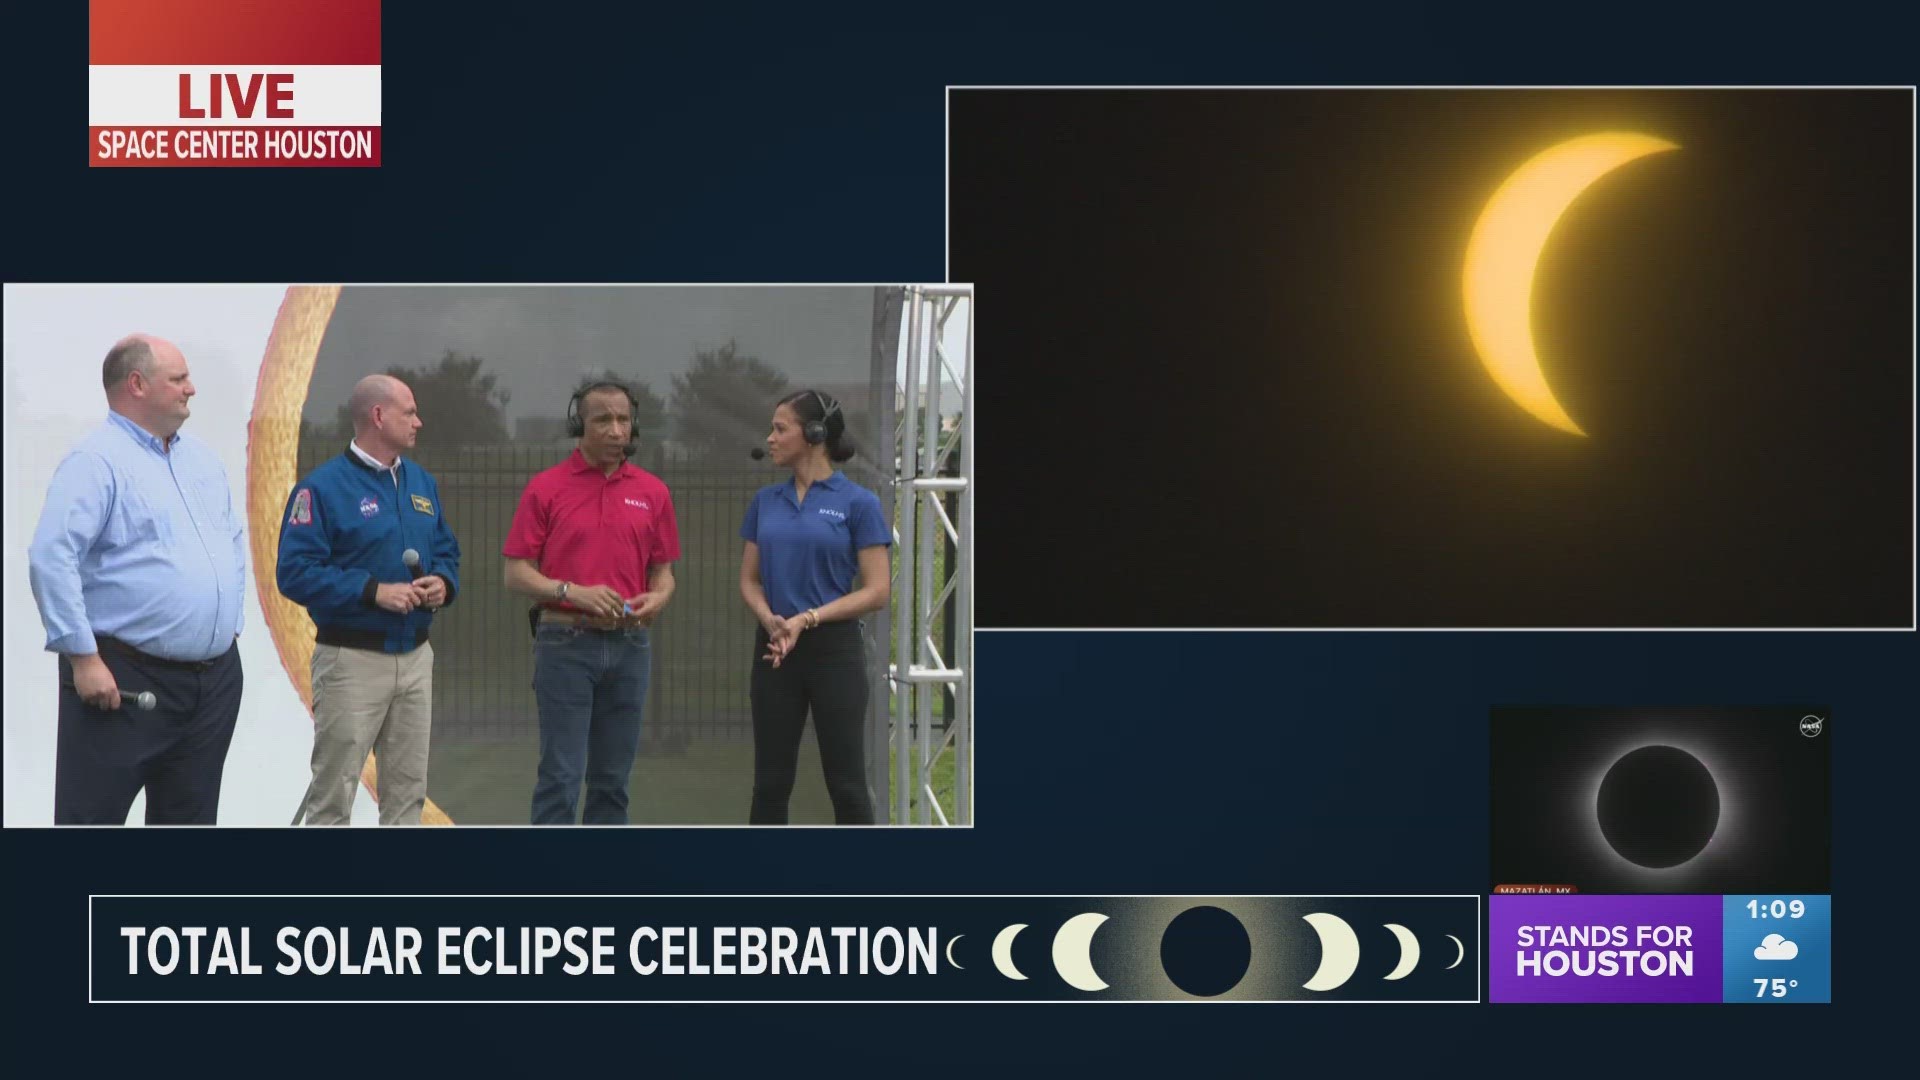 KHOU 11 was live at Space Center Houston during the solar eclipse on Monday, April 8.